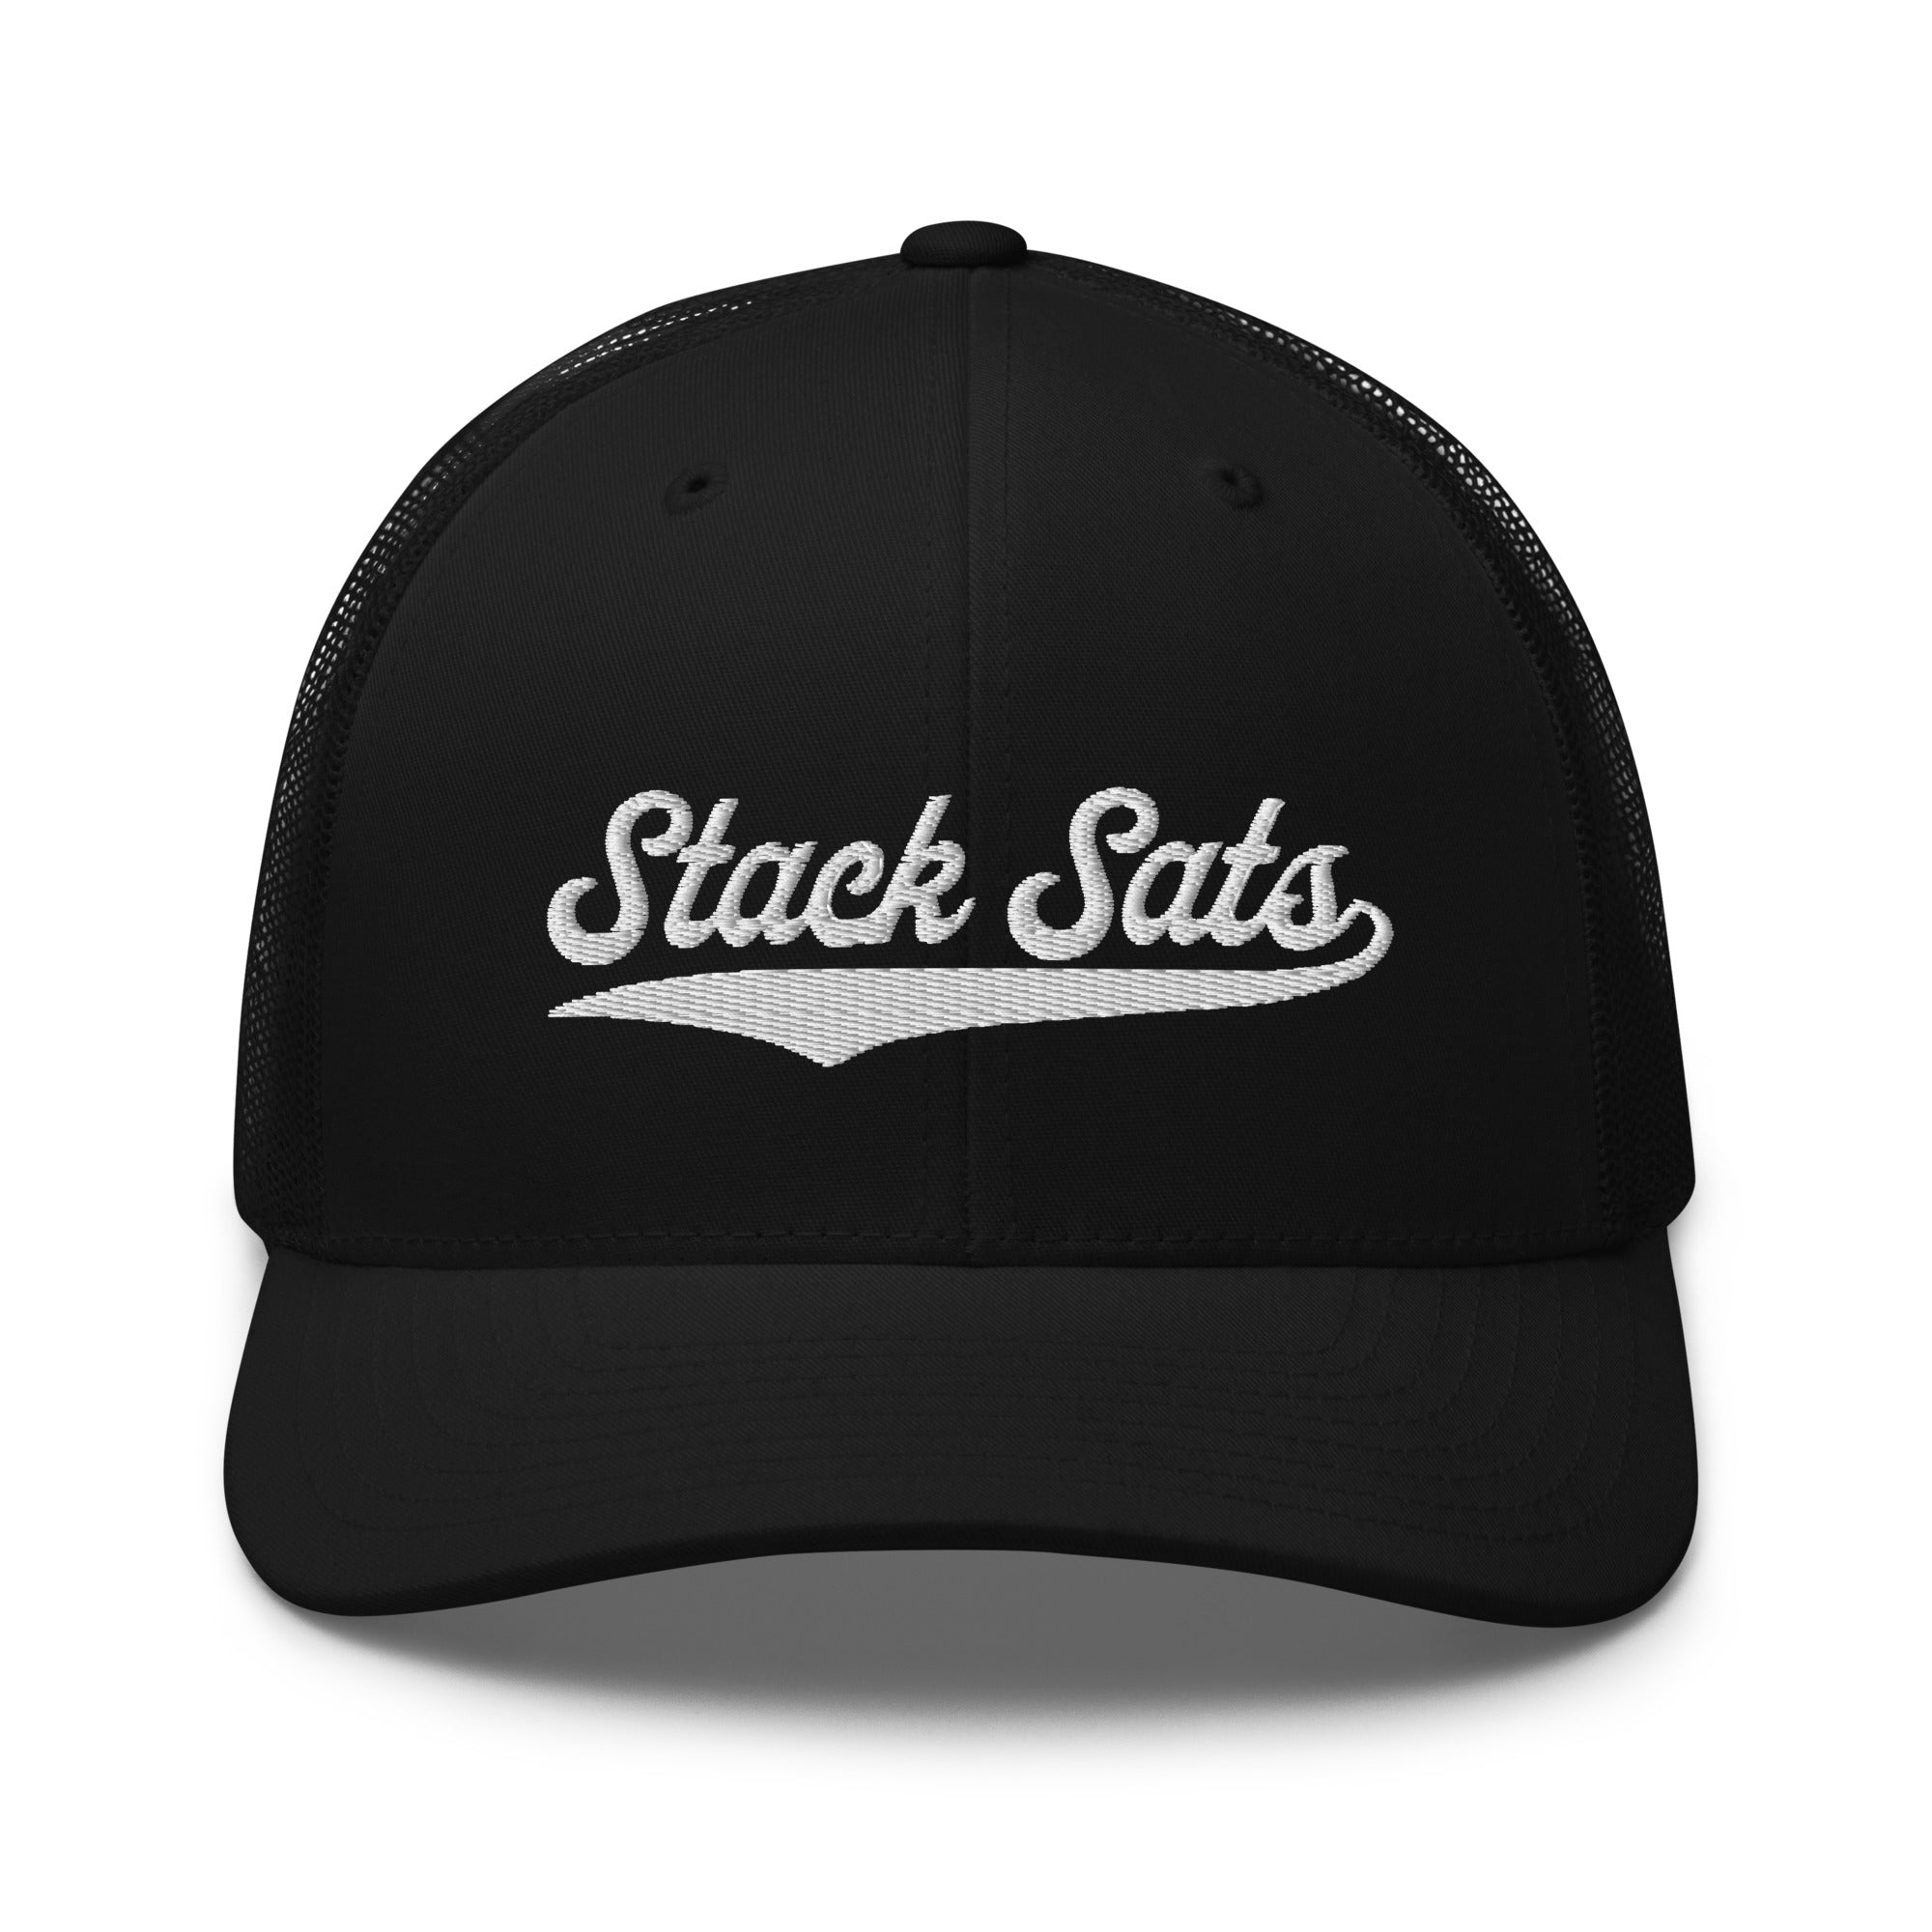 Bitcoin Hat - The Stack Sats Trucker Hat features a script logo on a black cap. Front view.